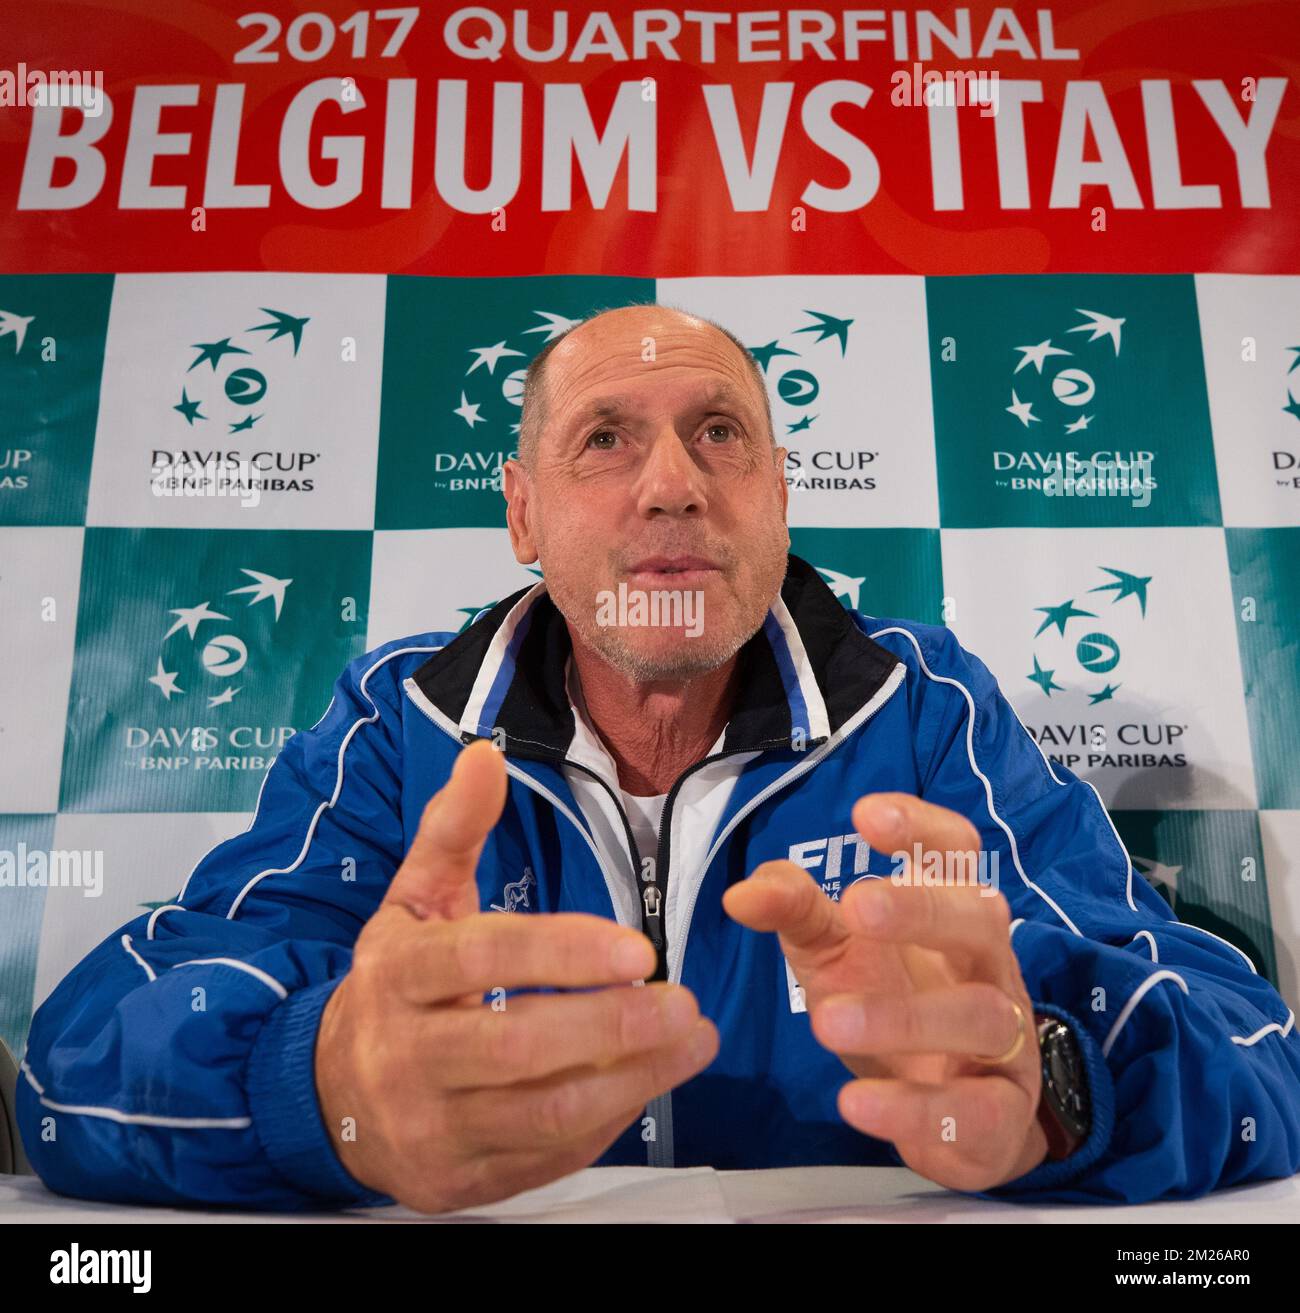 Italian captain Corrado Barazzutti pictured during a press conference of Italian team ahead of the Davis Cup World Group quarterfinal between Belgium and Italy, Tuesday 04 April 2017, in Charleroi. This Davis Cup game will be played from 07 to 09 April 2017 in Charleroi. BELGA PHOTO BENOIT DOPPAGNE Stock Photo